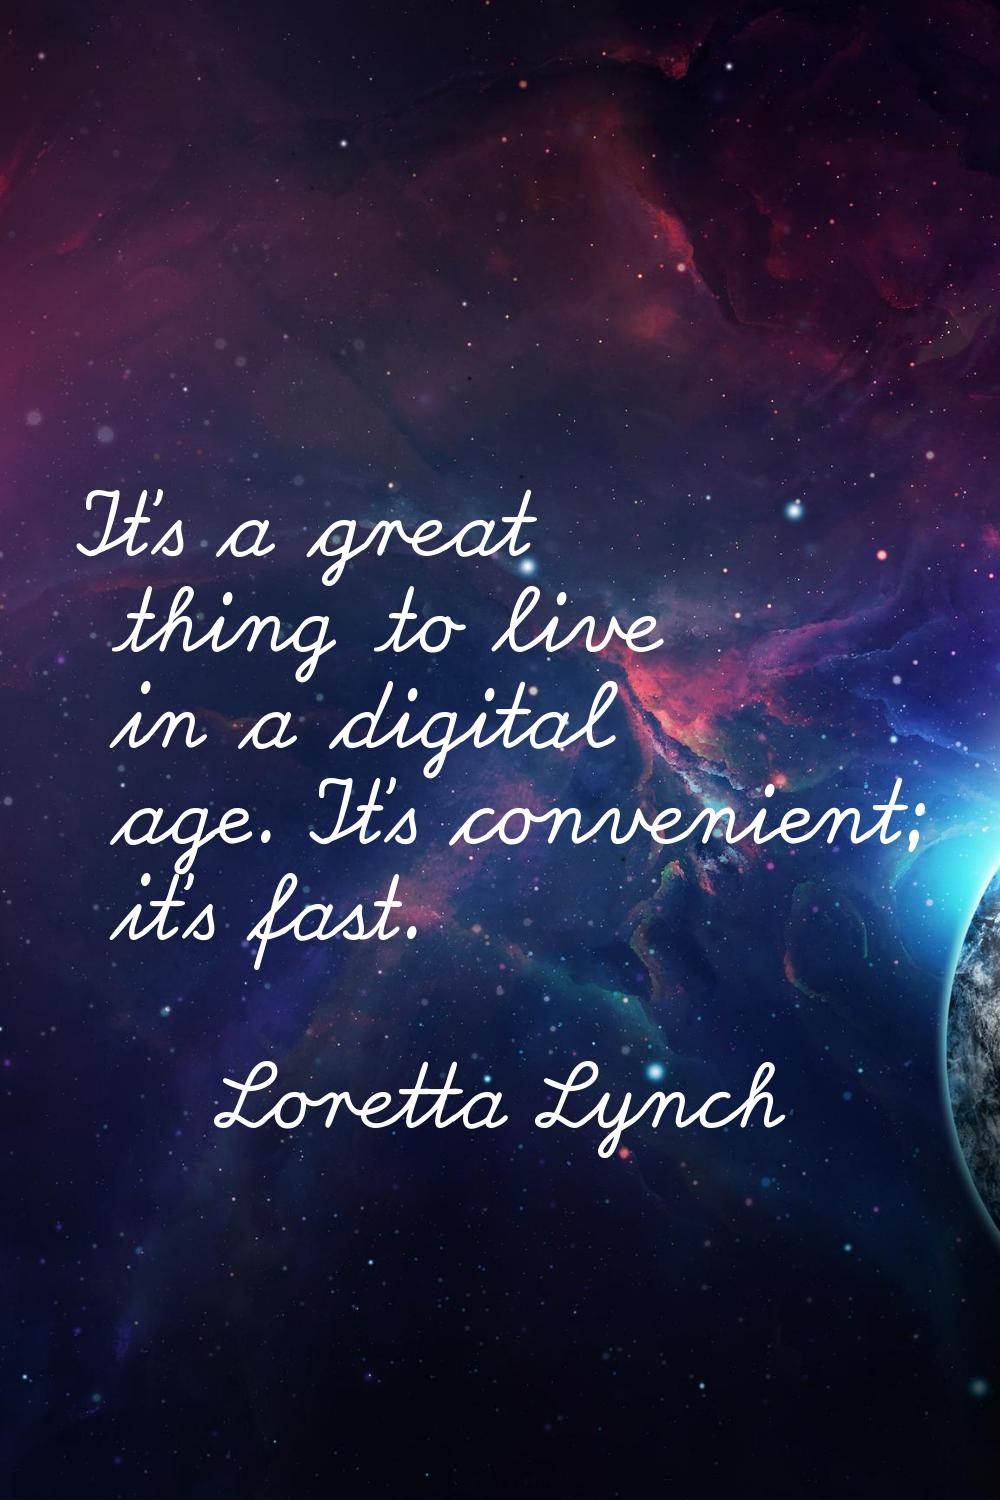 It's a great thing to live in a digital age. It's convenient; it's fast.